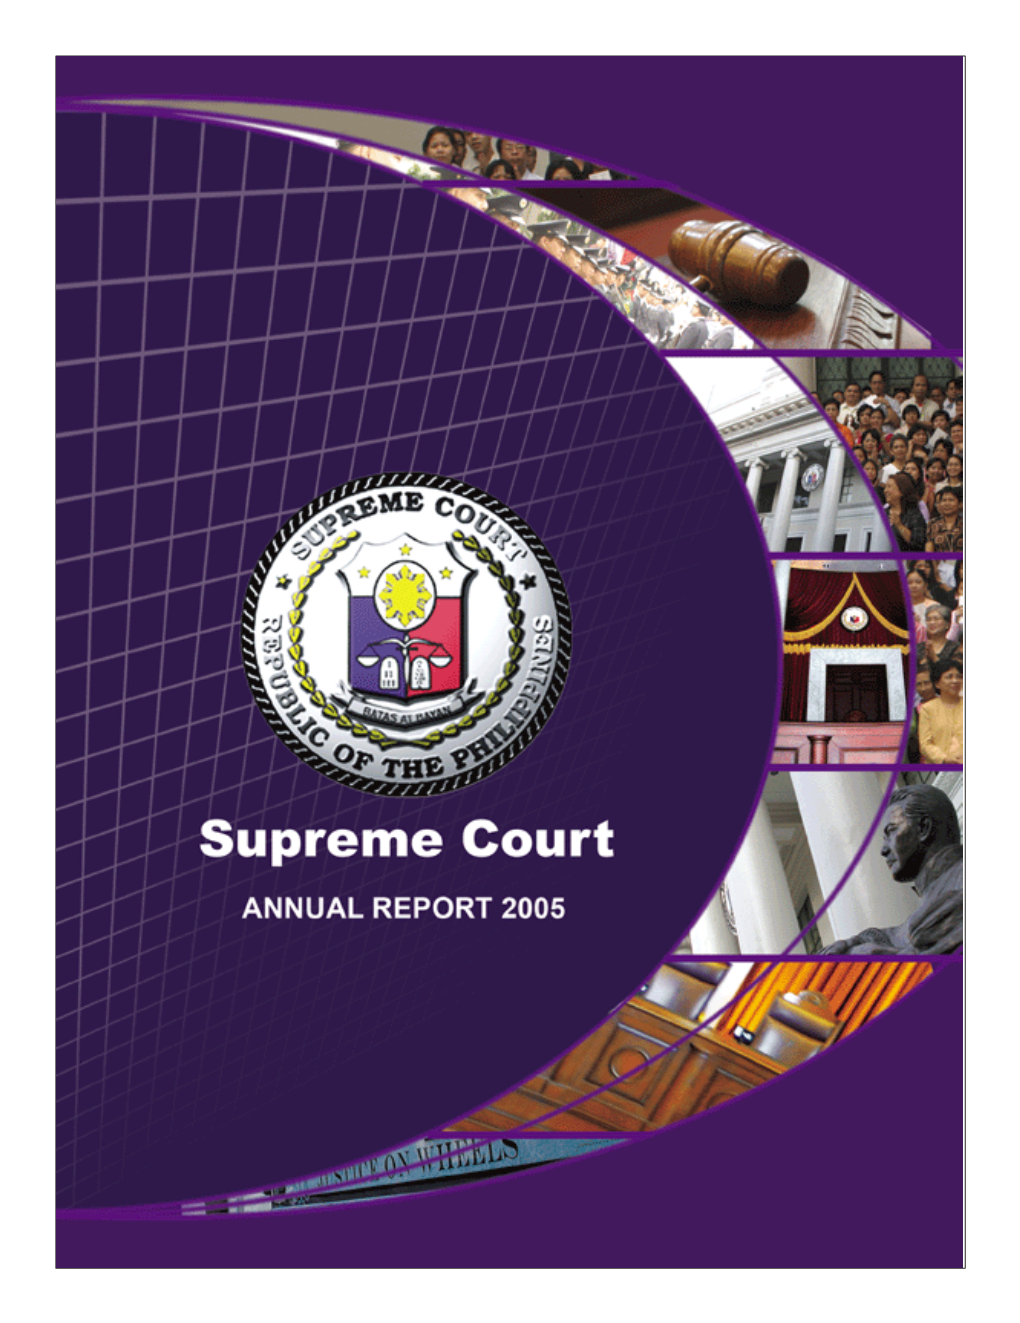 This Annual Report